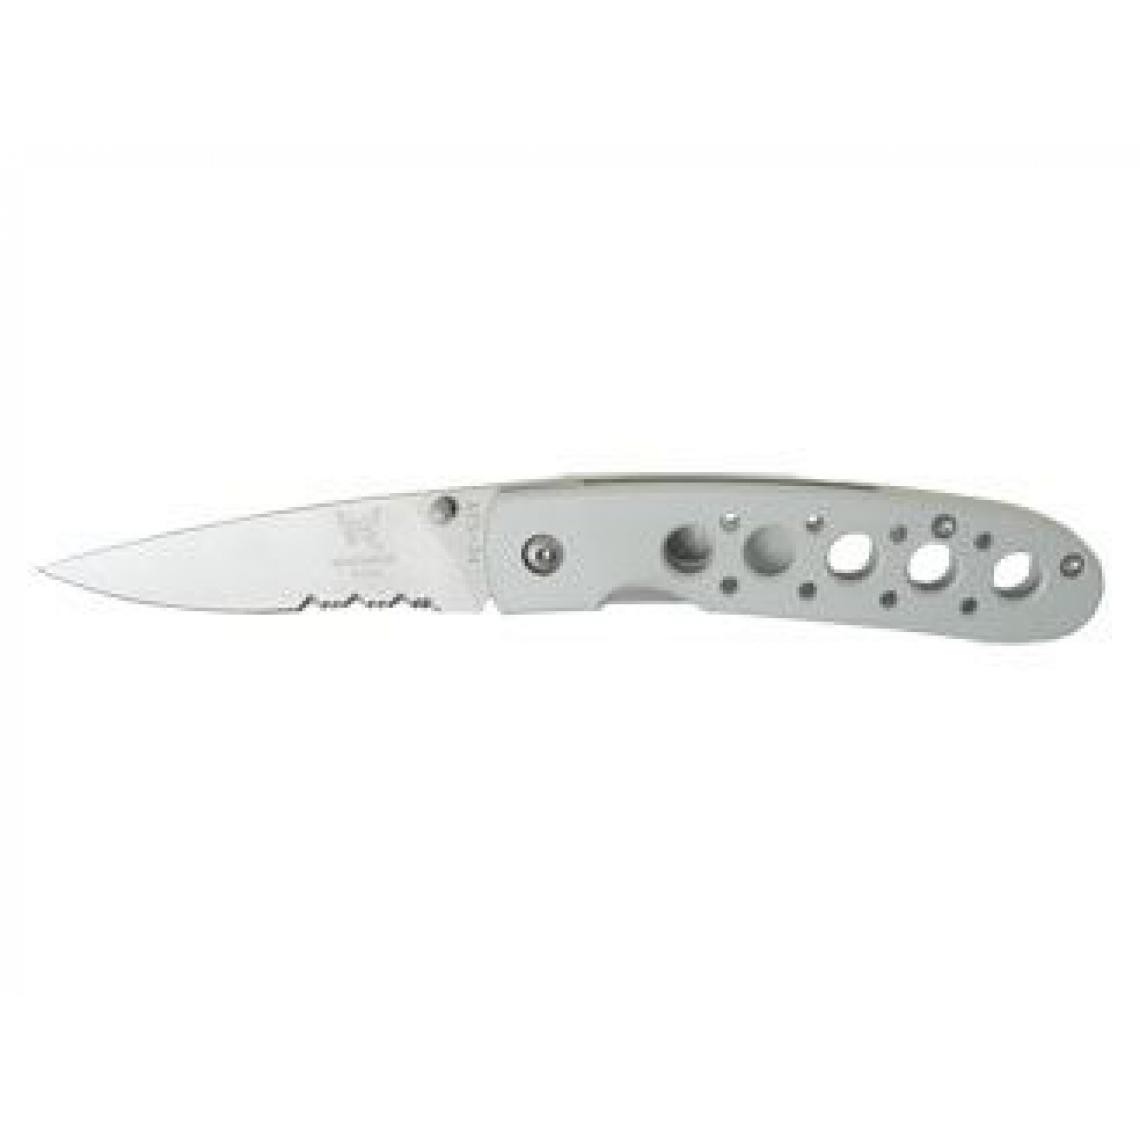 Divers Marques - Benchmade LEOPARD 625S COMBO - Outils de coupe